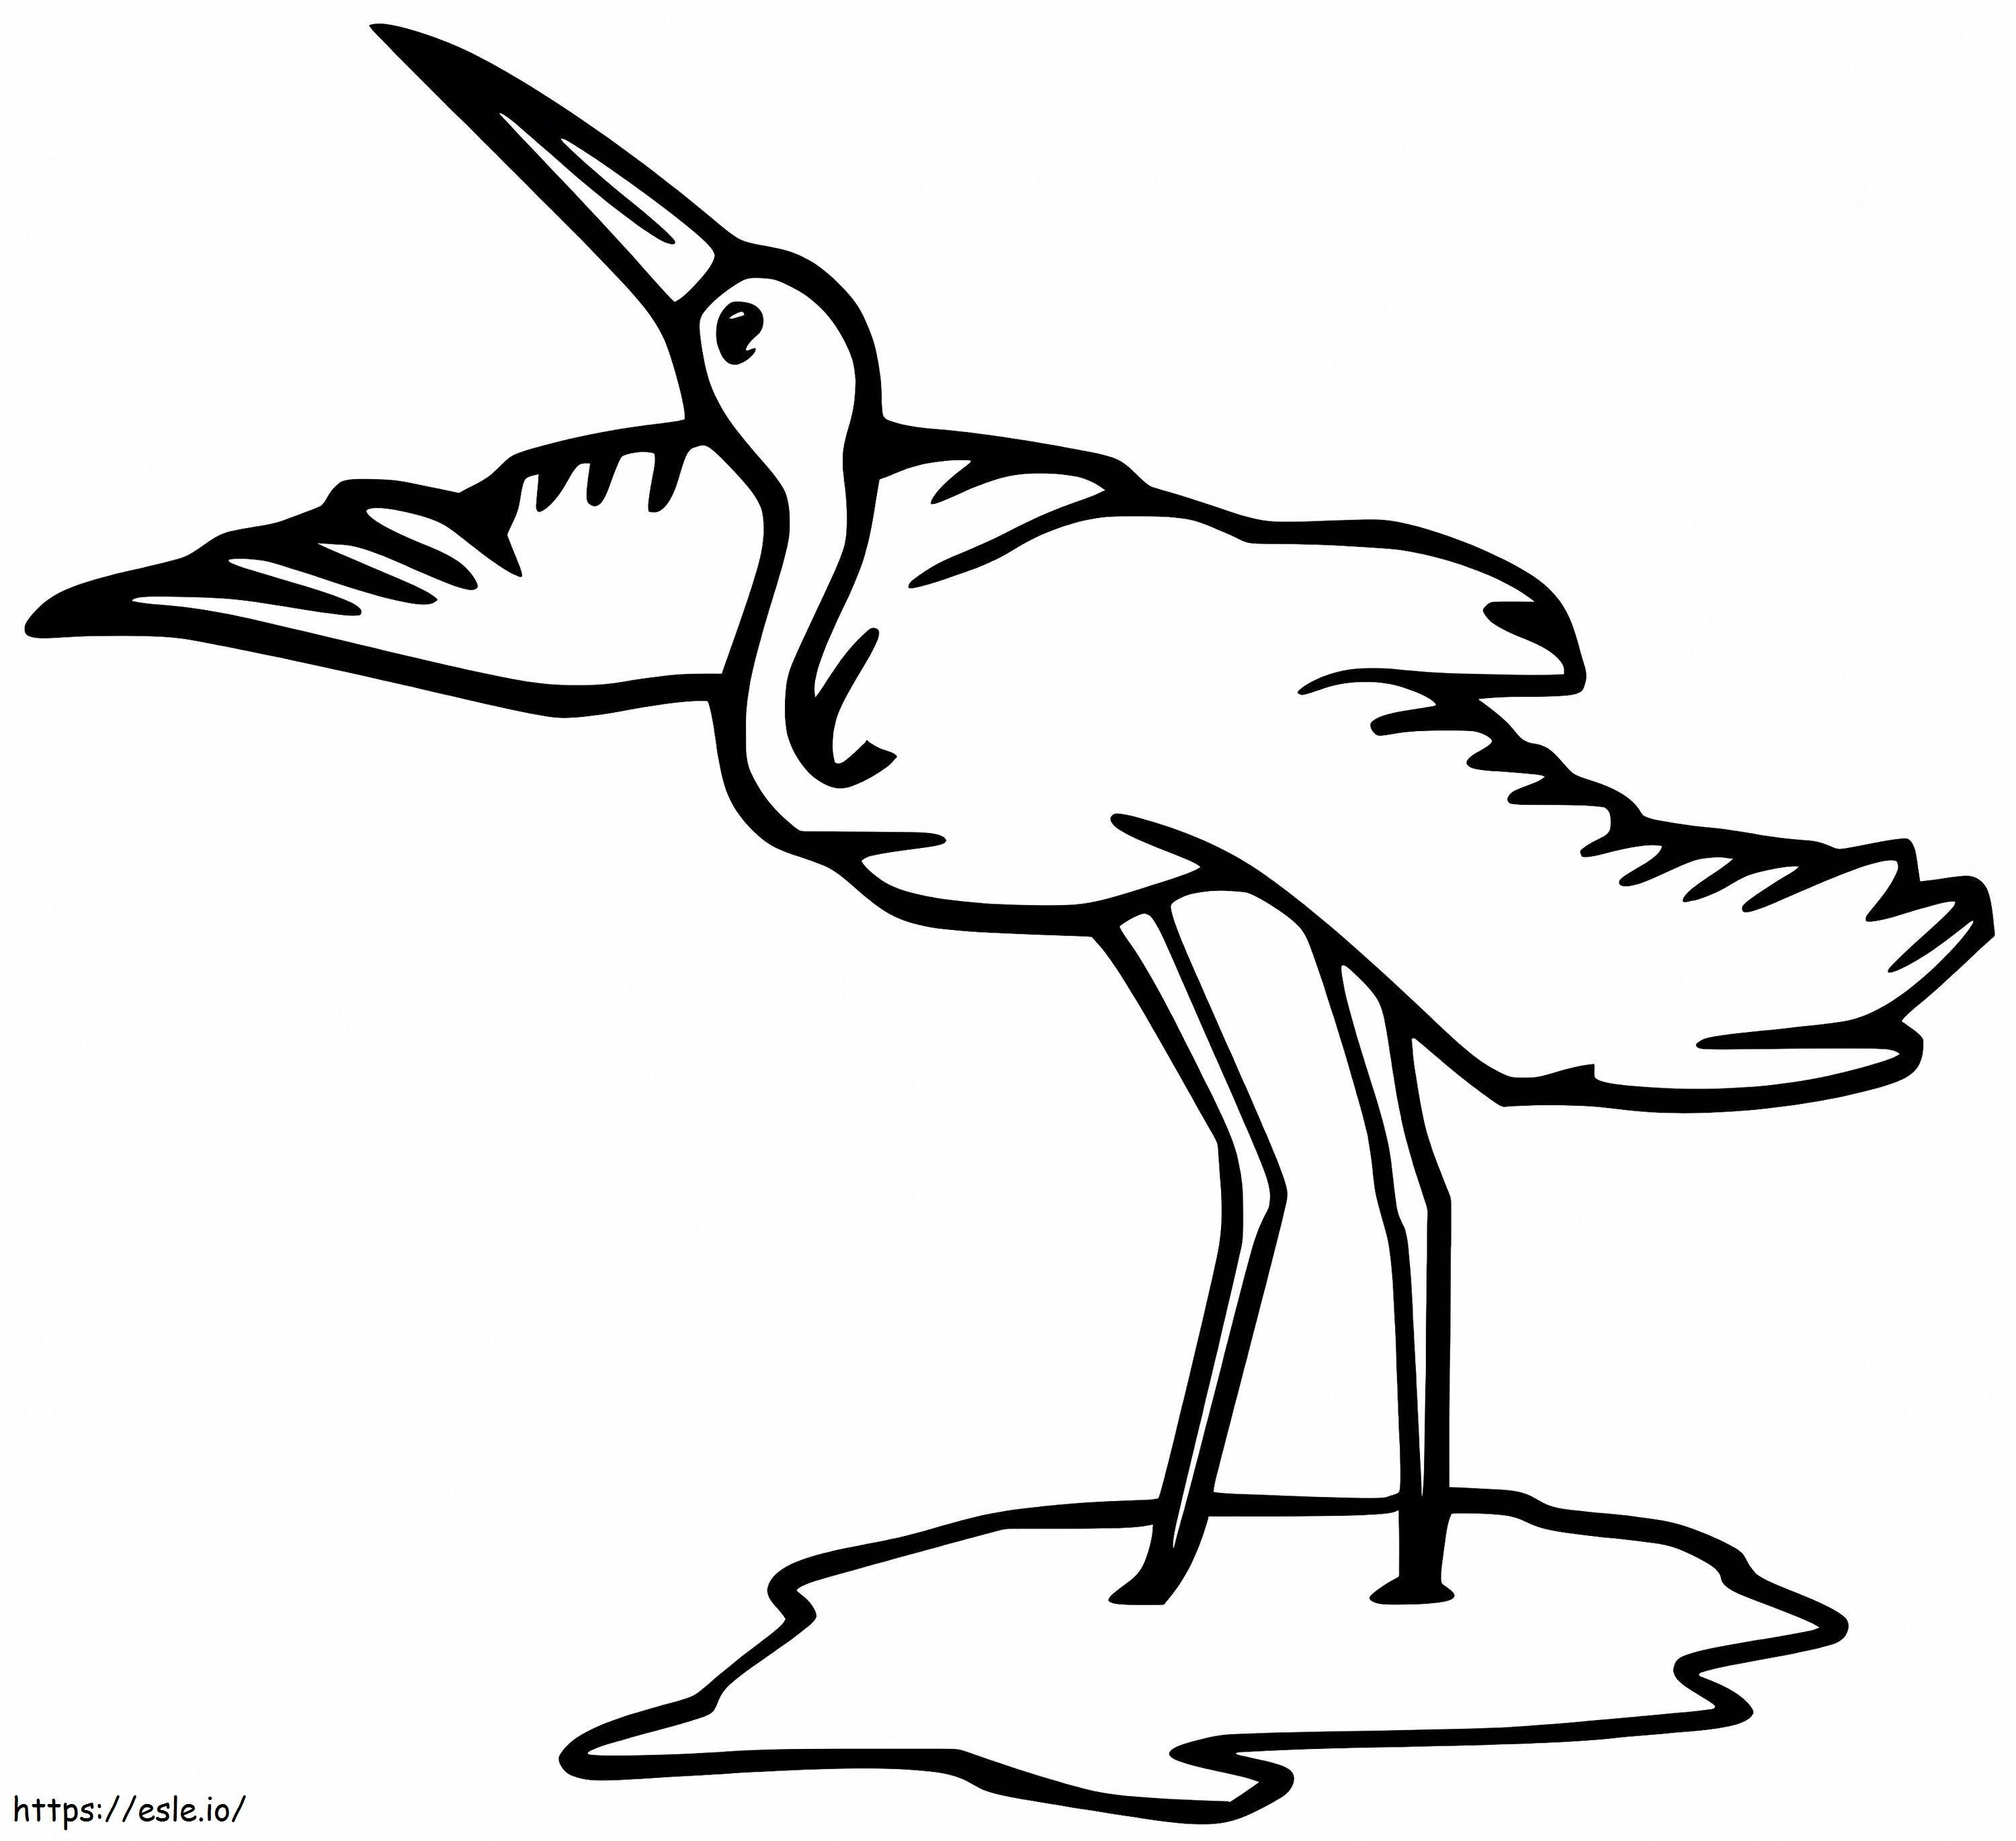 Crane Standing coloring page